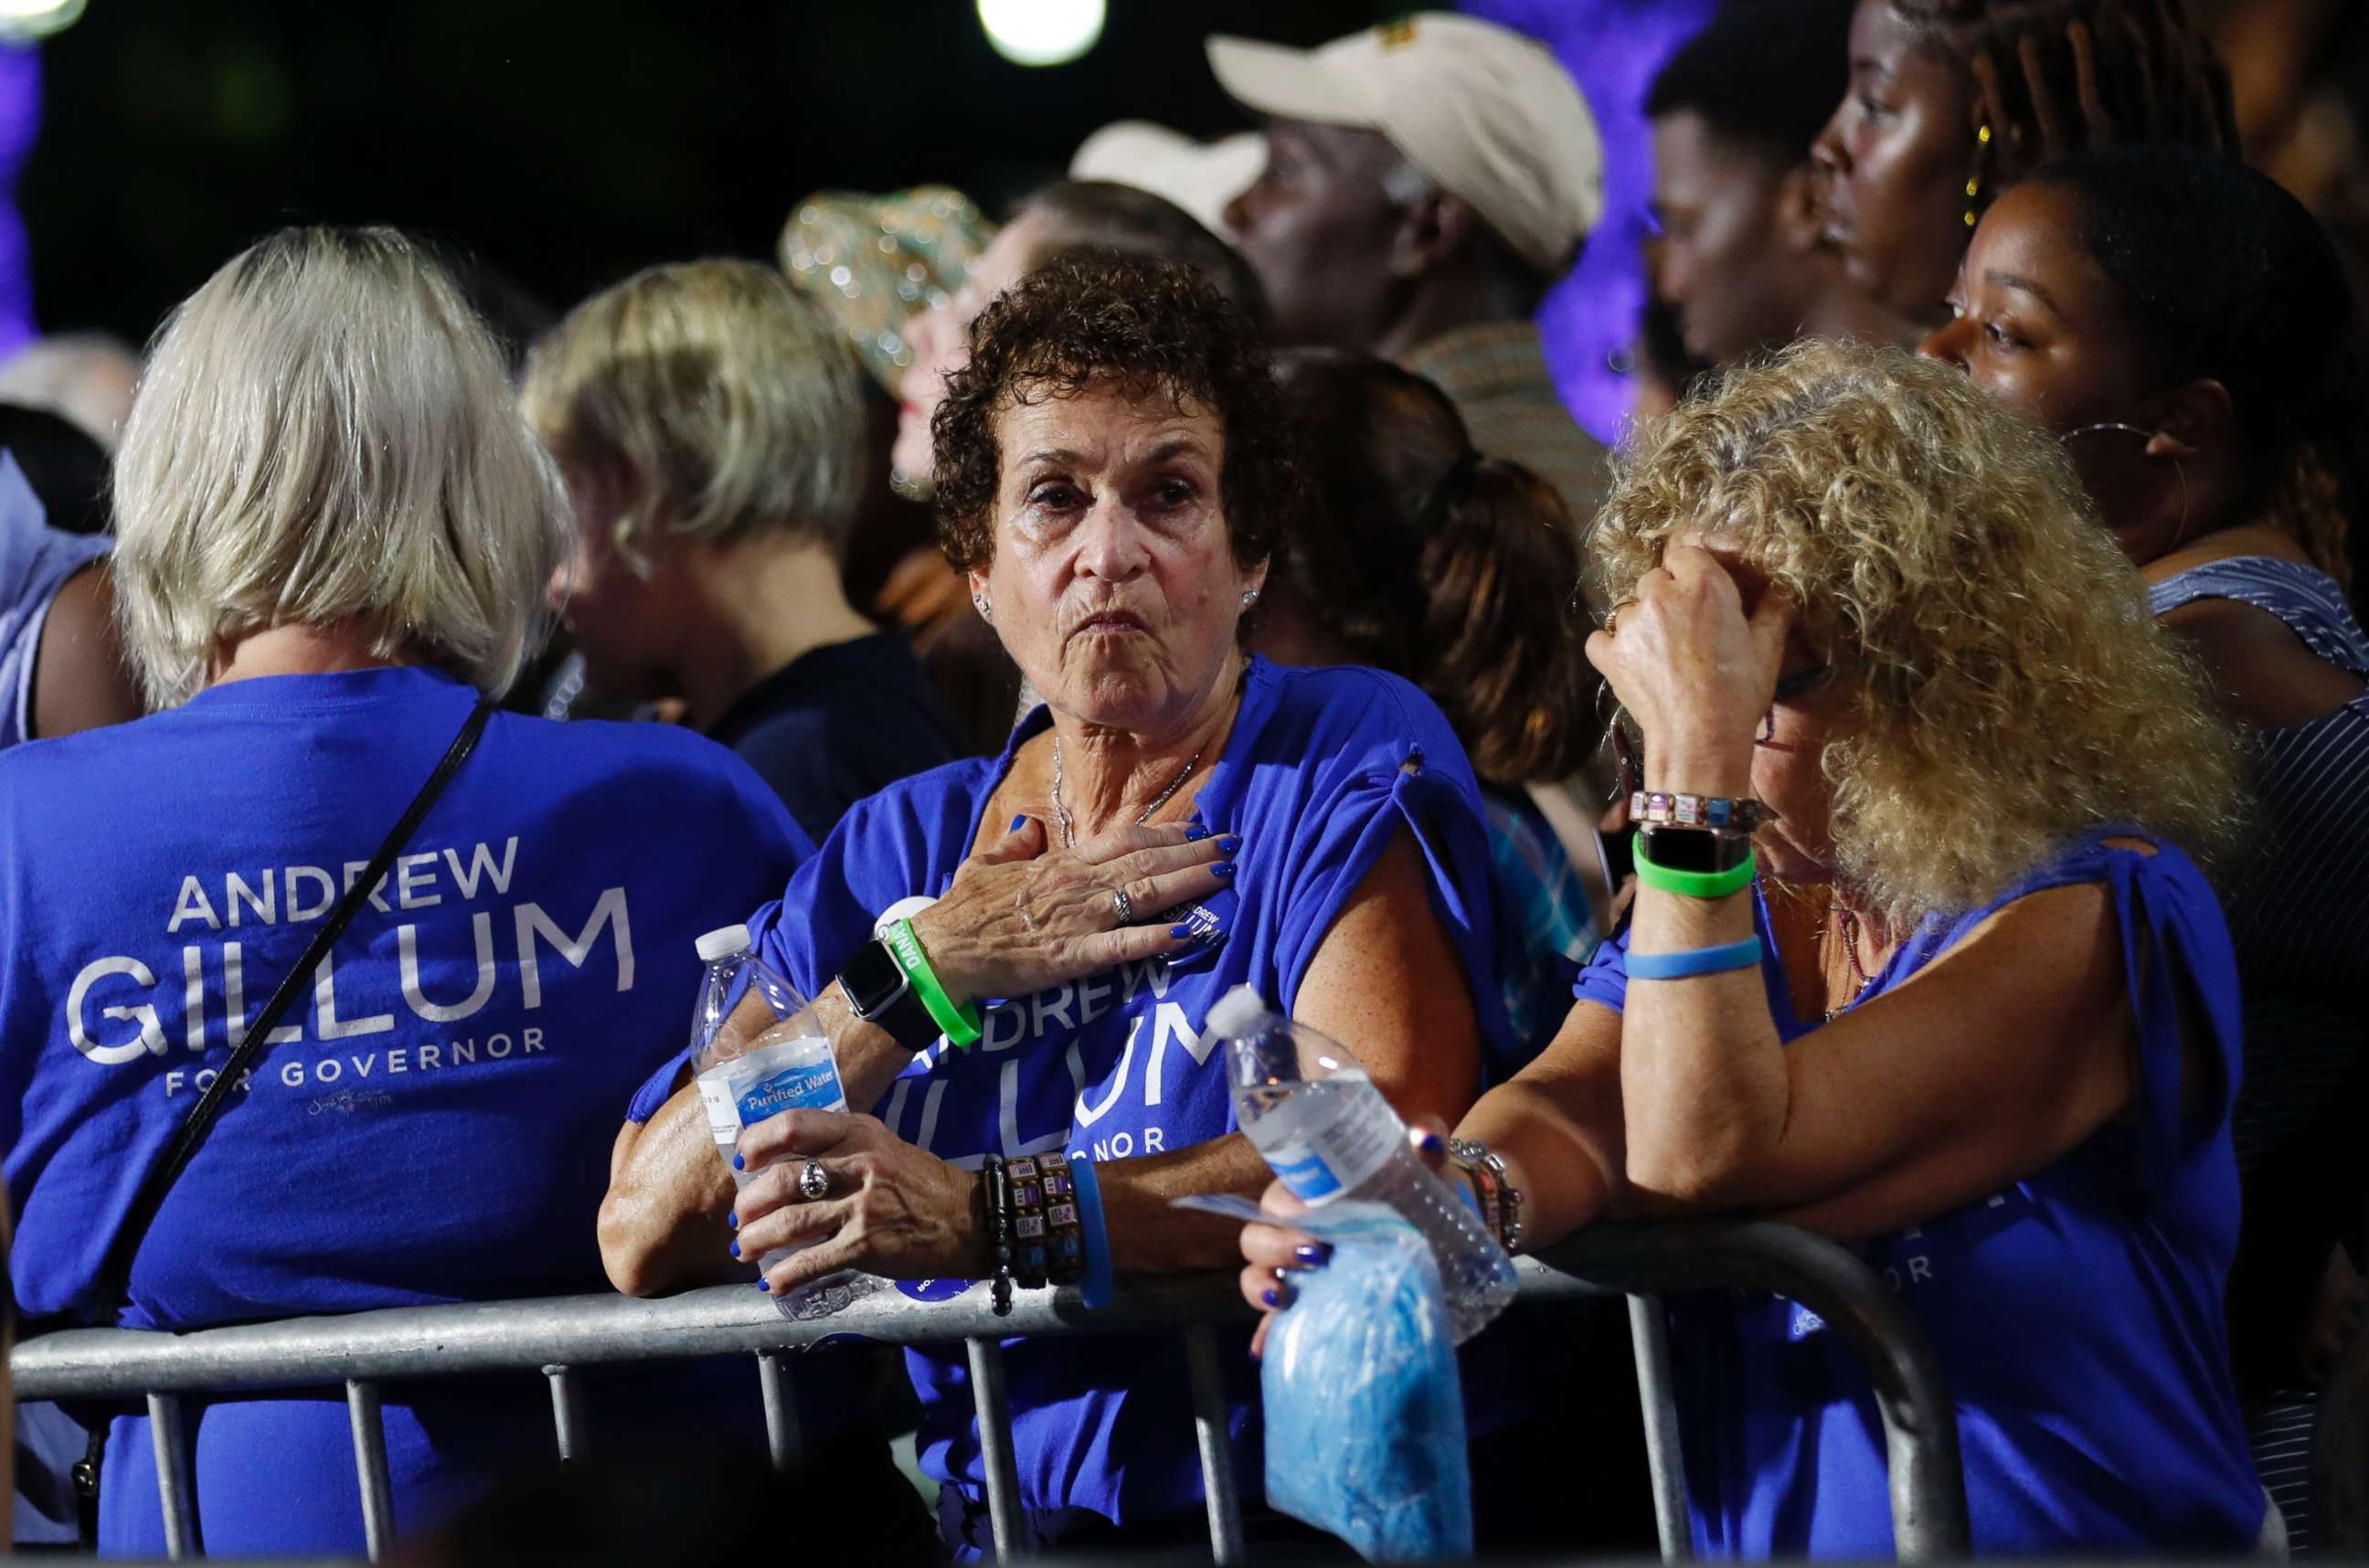 PHOTO: Supporters of Democratic gubernatorial candidate Andrew Gillum react at his midterm election night party in Tallahassee, Fla., Nov. 6, 2018.